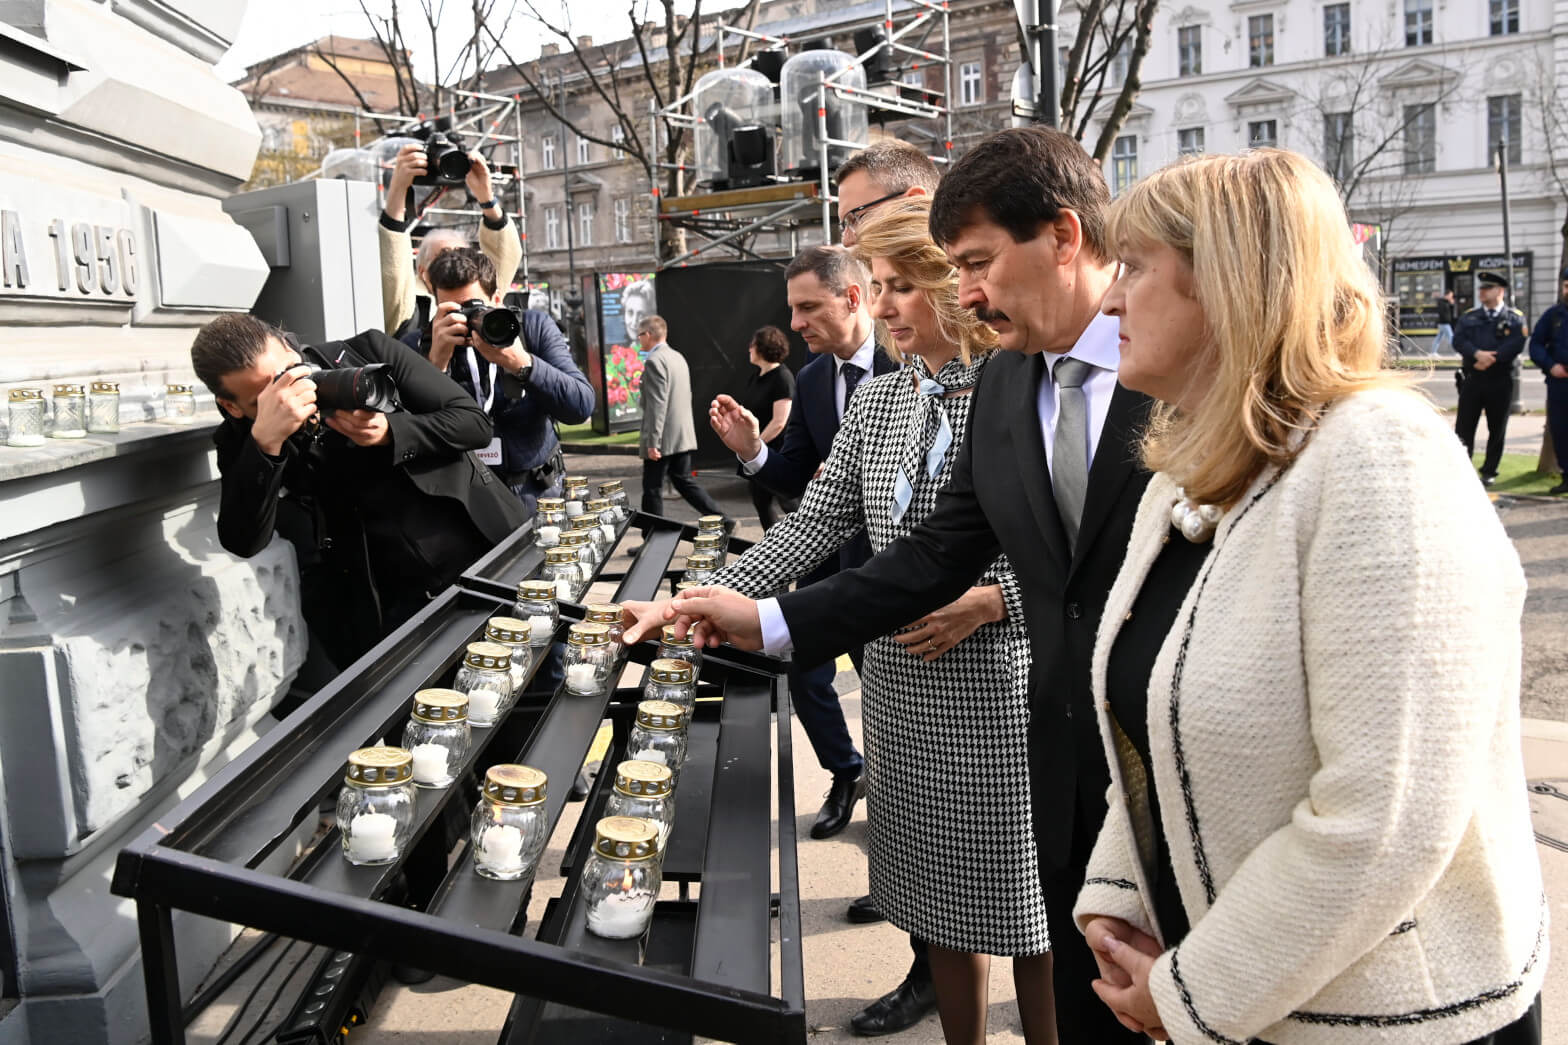 Victims Of Communism in Hungary Commemorated at House of Terror Museum in Budapest